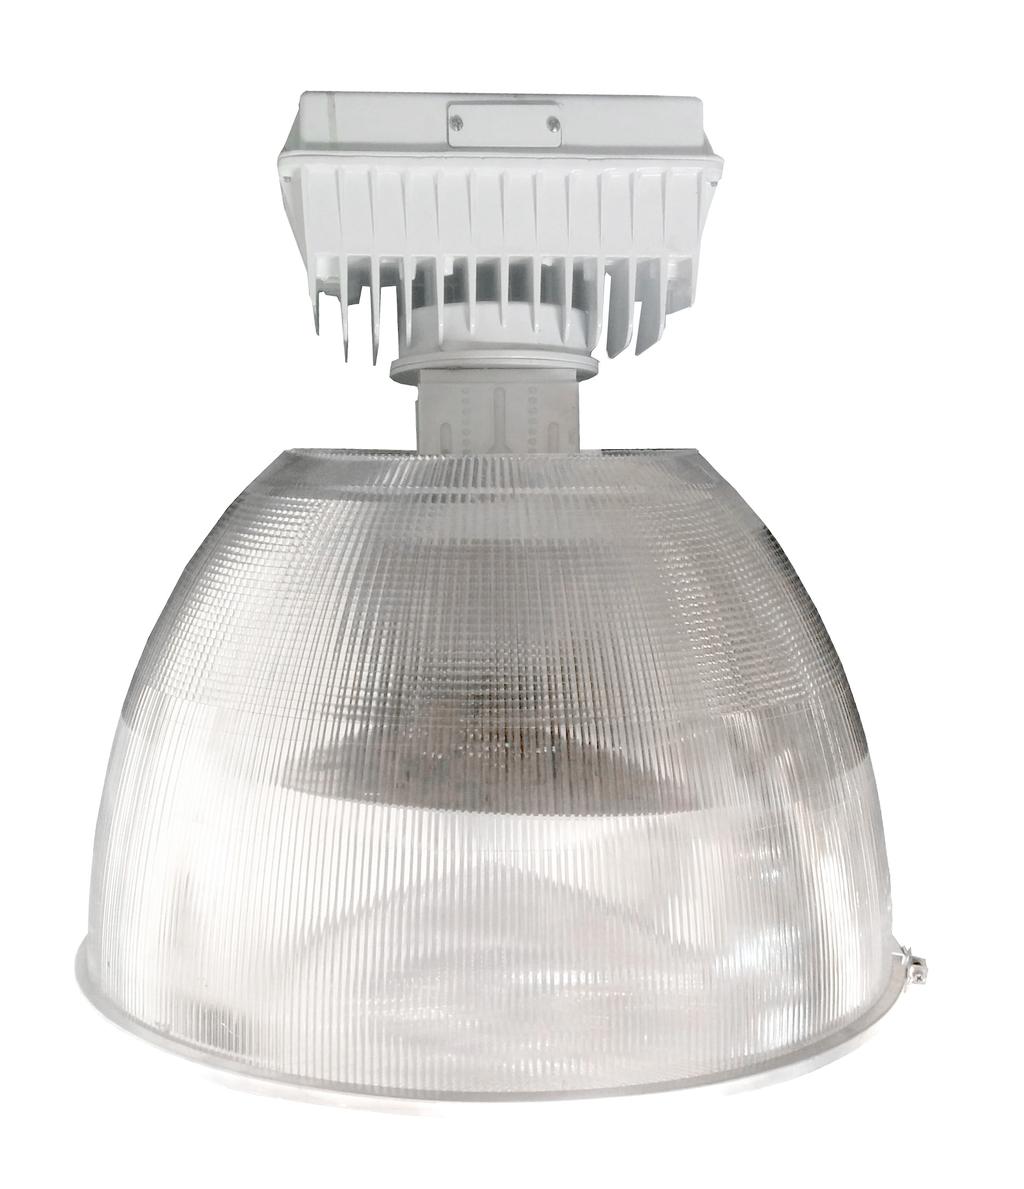 Product Information The Highbay.DL is a highly efficient industrial LED lighting solution.